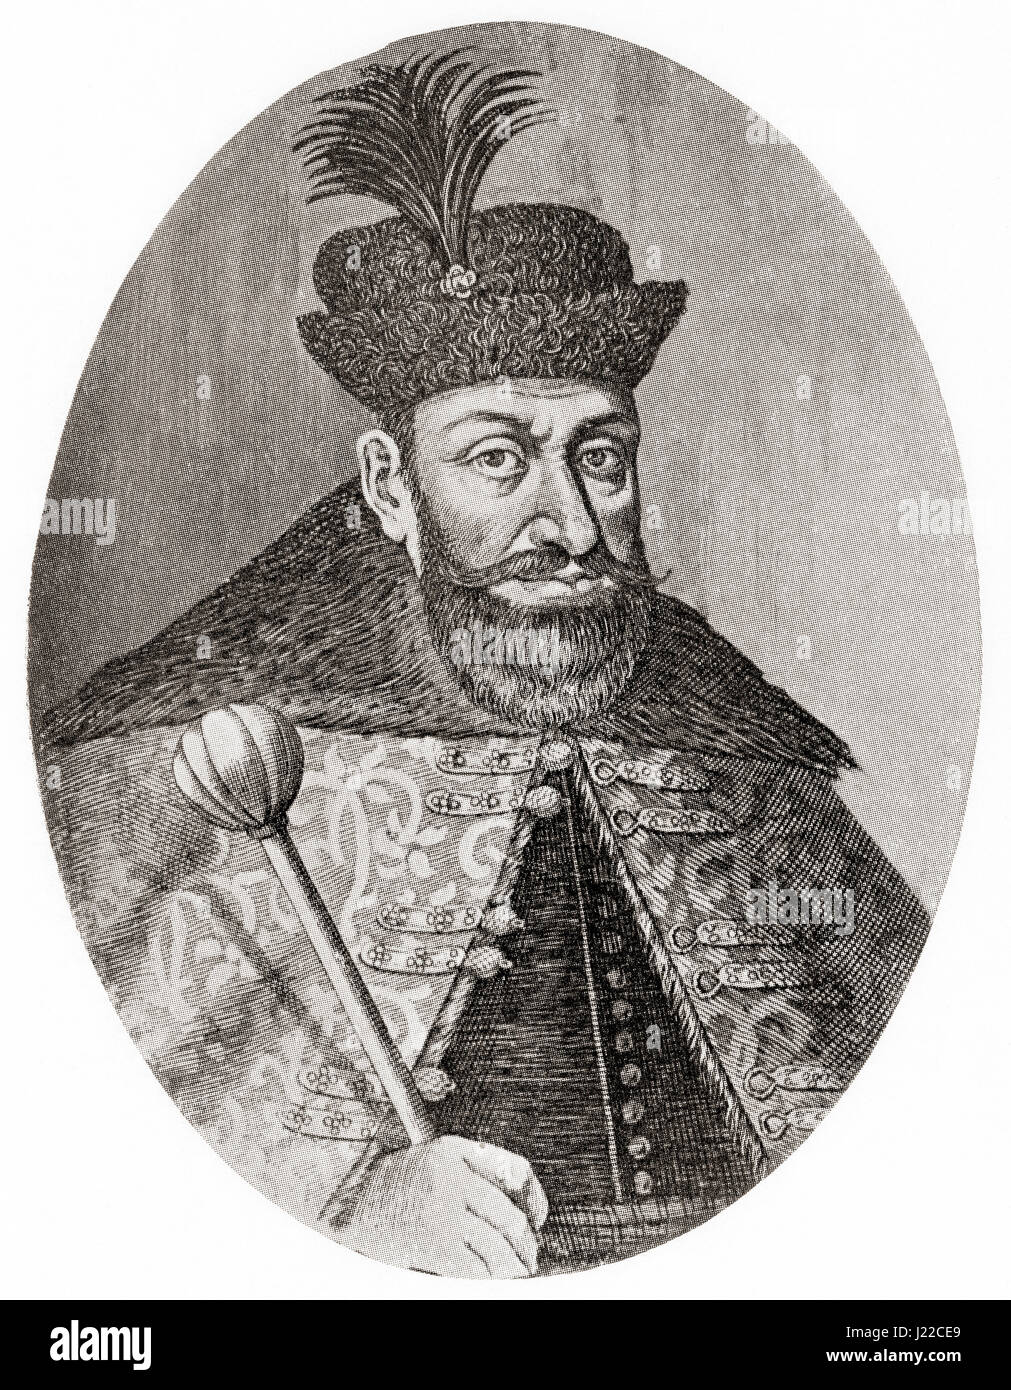 Gabriel Bethlen, 1580 – 1629.  Prince of Transylvania, Duke of Opole and King-elect of Hungary from 1620 to 1621.  From Hutchinson's History of the Nations, published 1915 Stock Photo